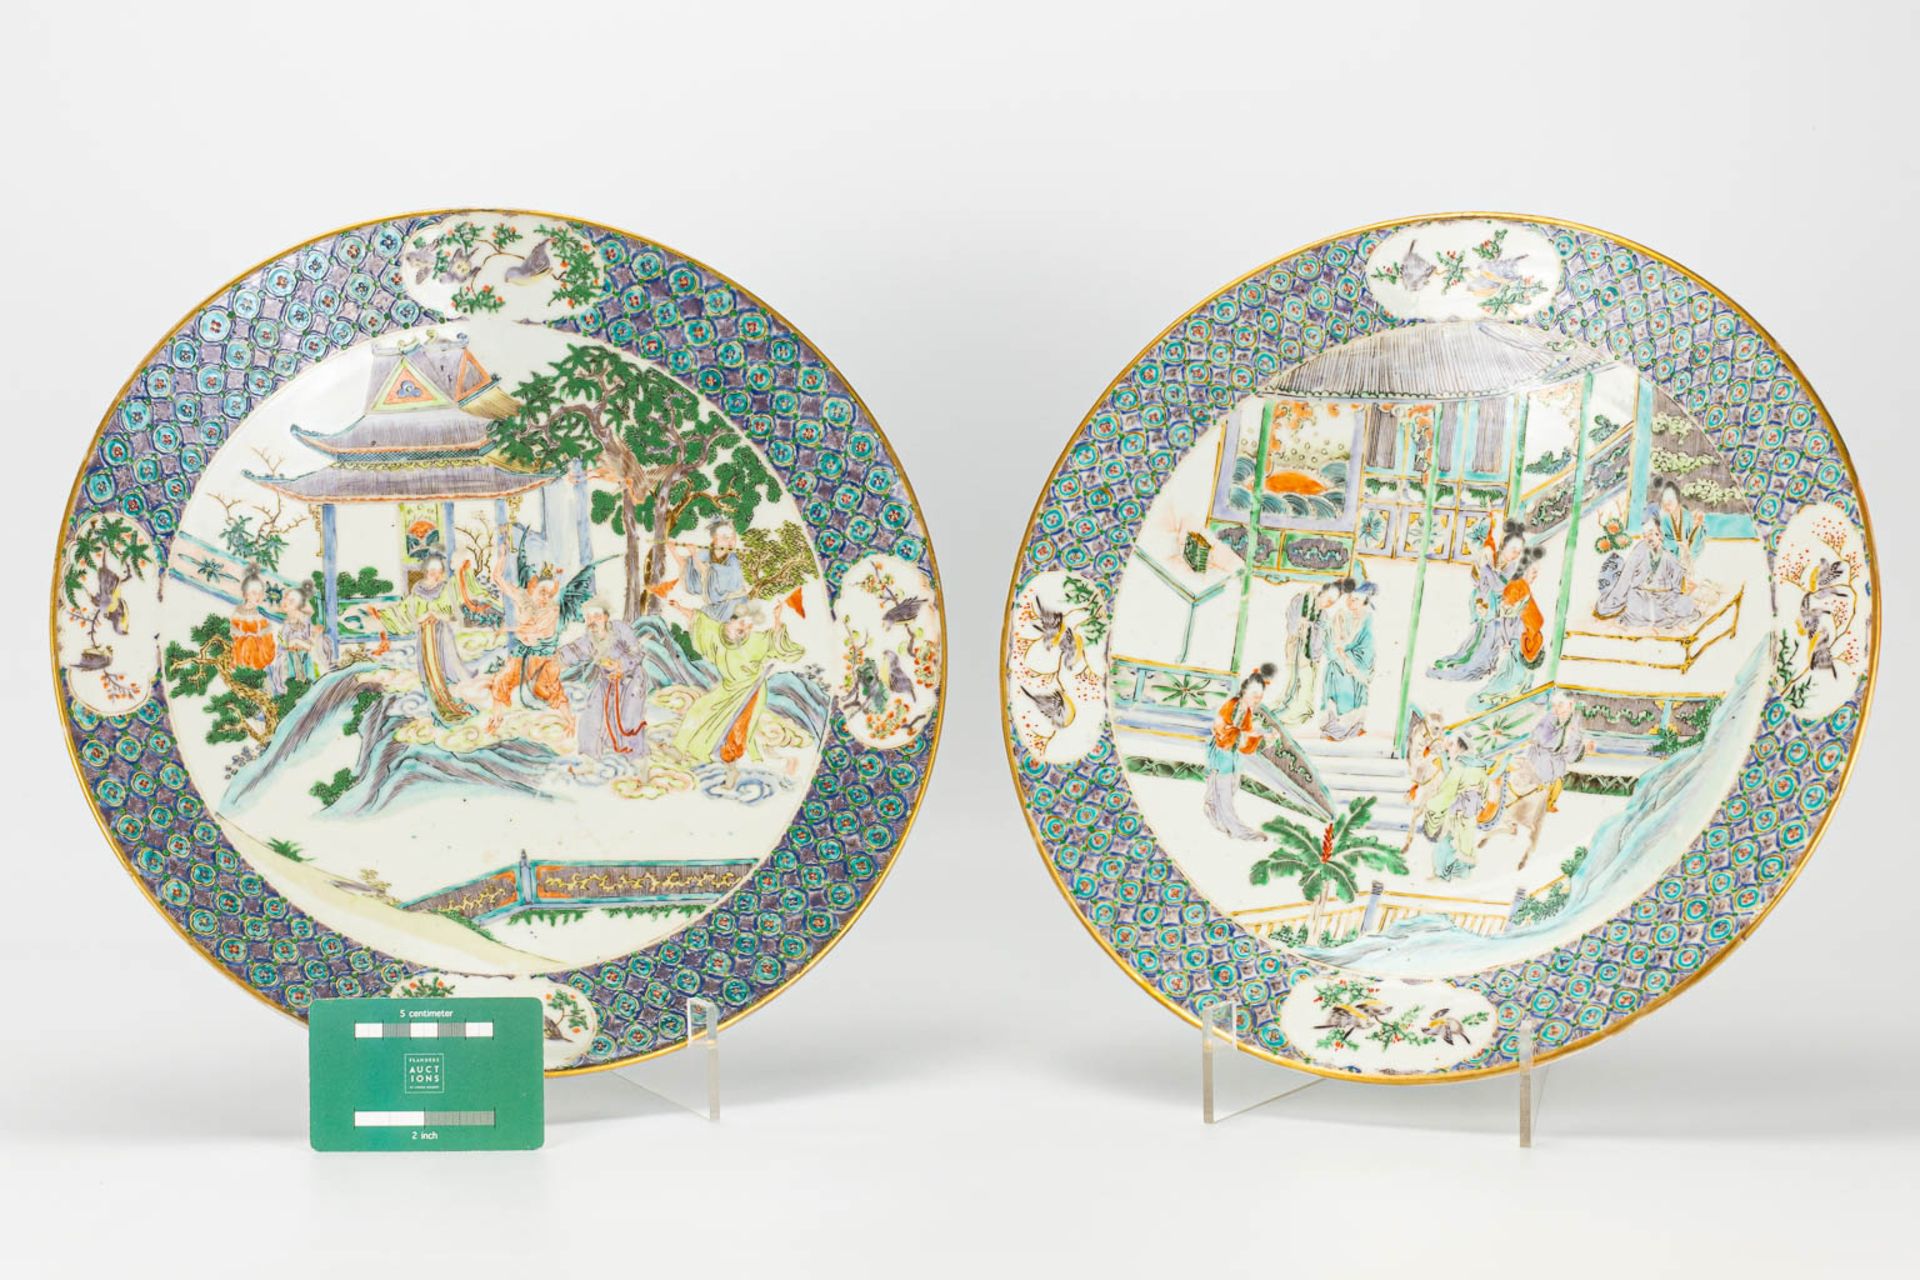 A pair of plates made of Chinese porcelain in Kanton style. 19th century. - Image 22 of 24